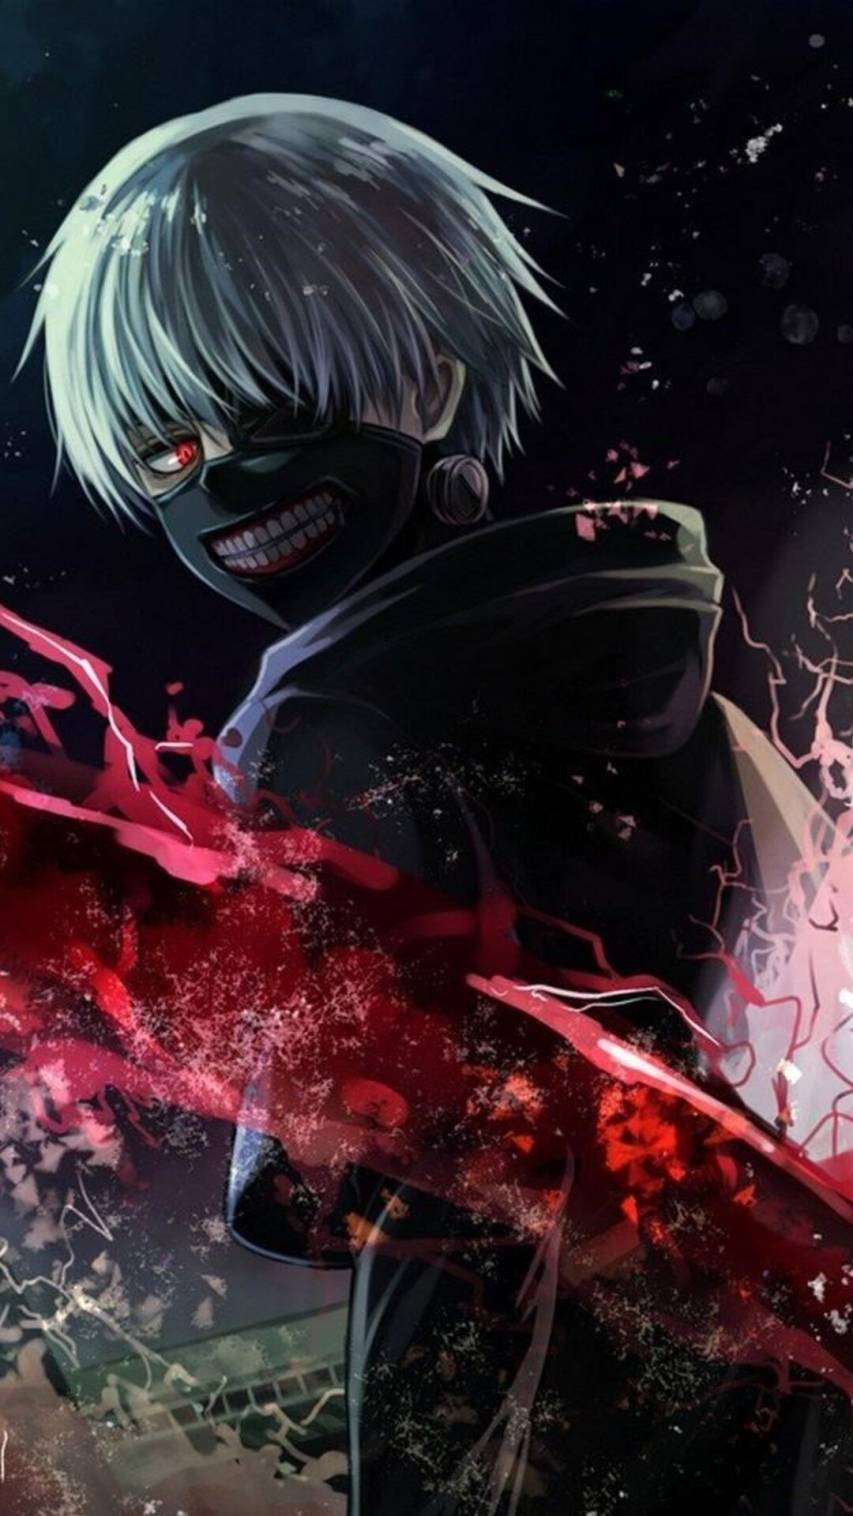 Tokyo Ghoul IPhone HD Wallpaper, Top Free Tokyo Ghoul iPhone Background